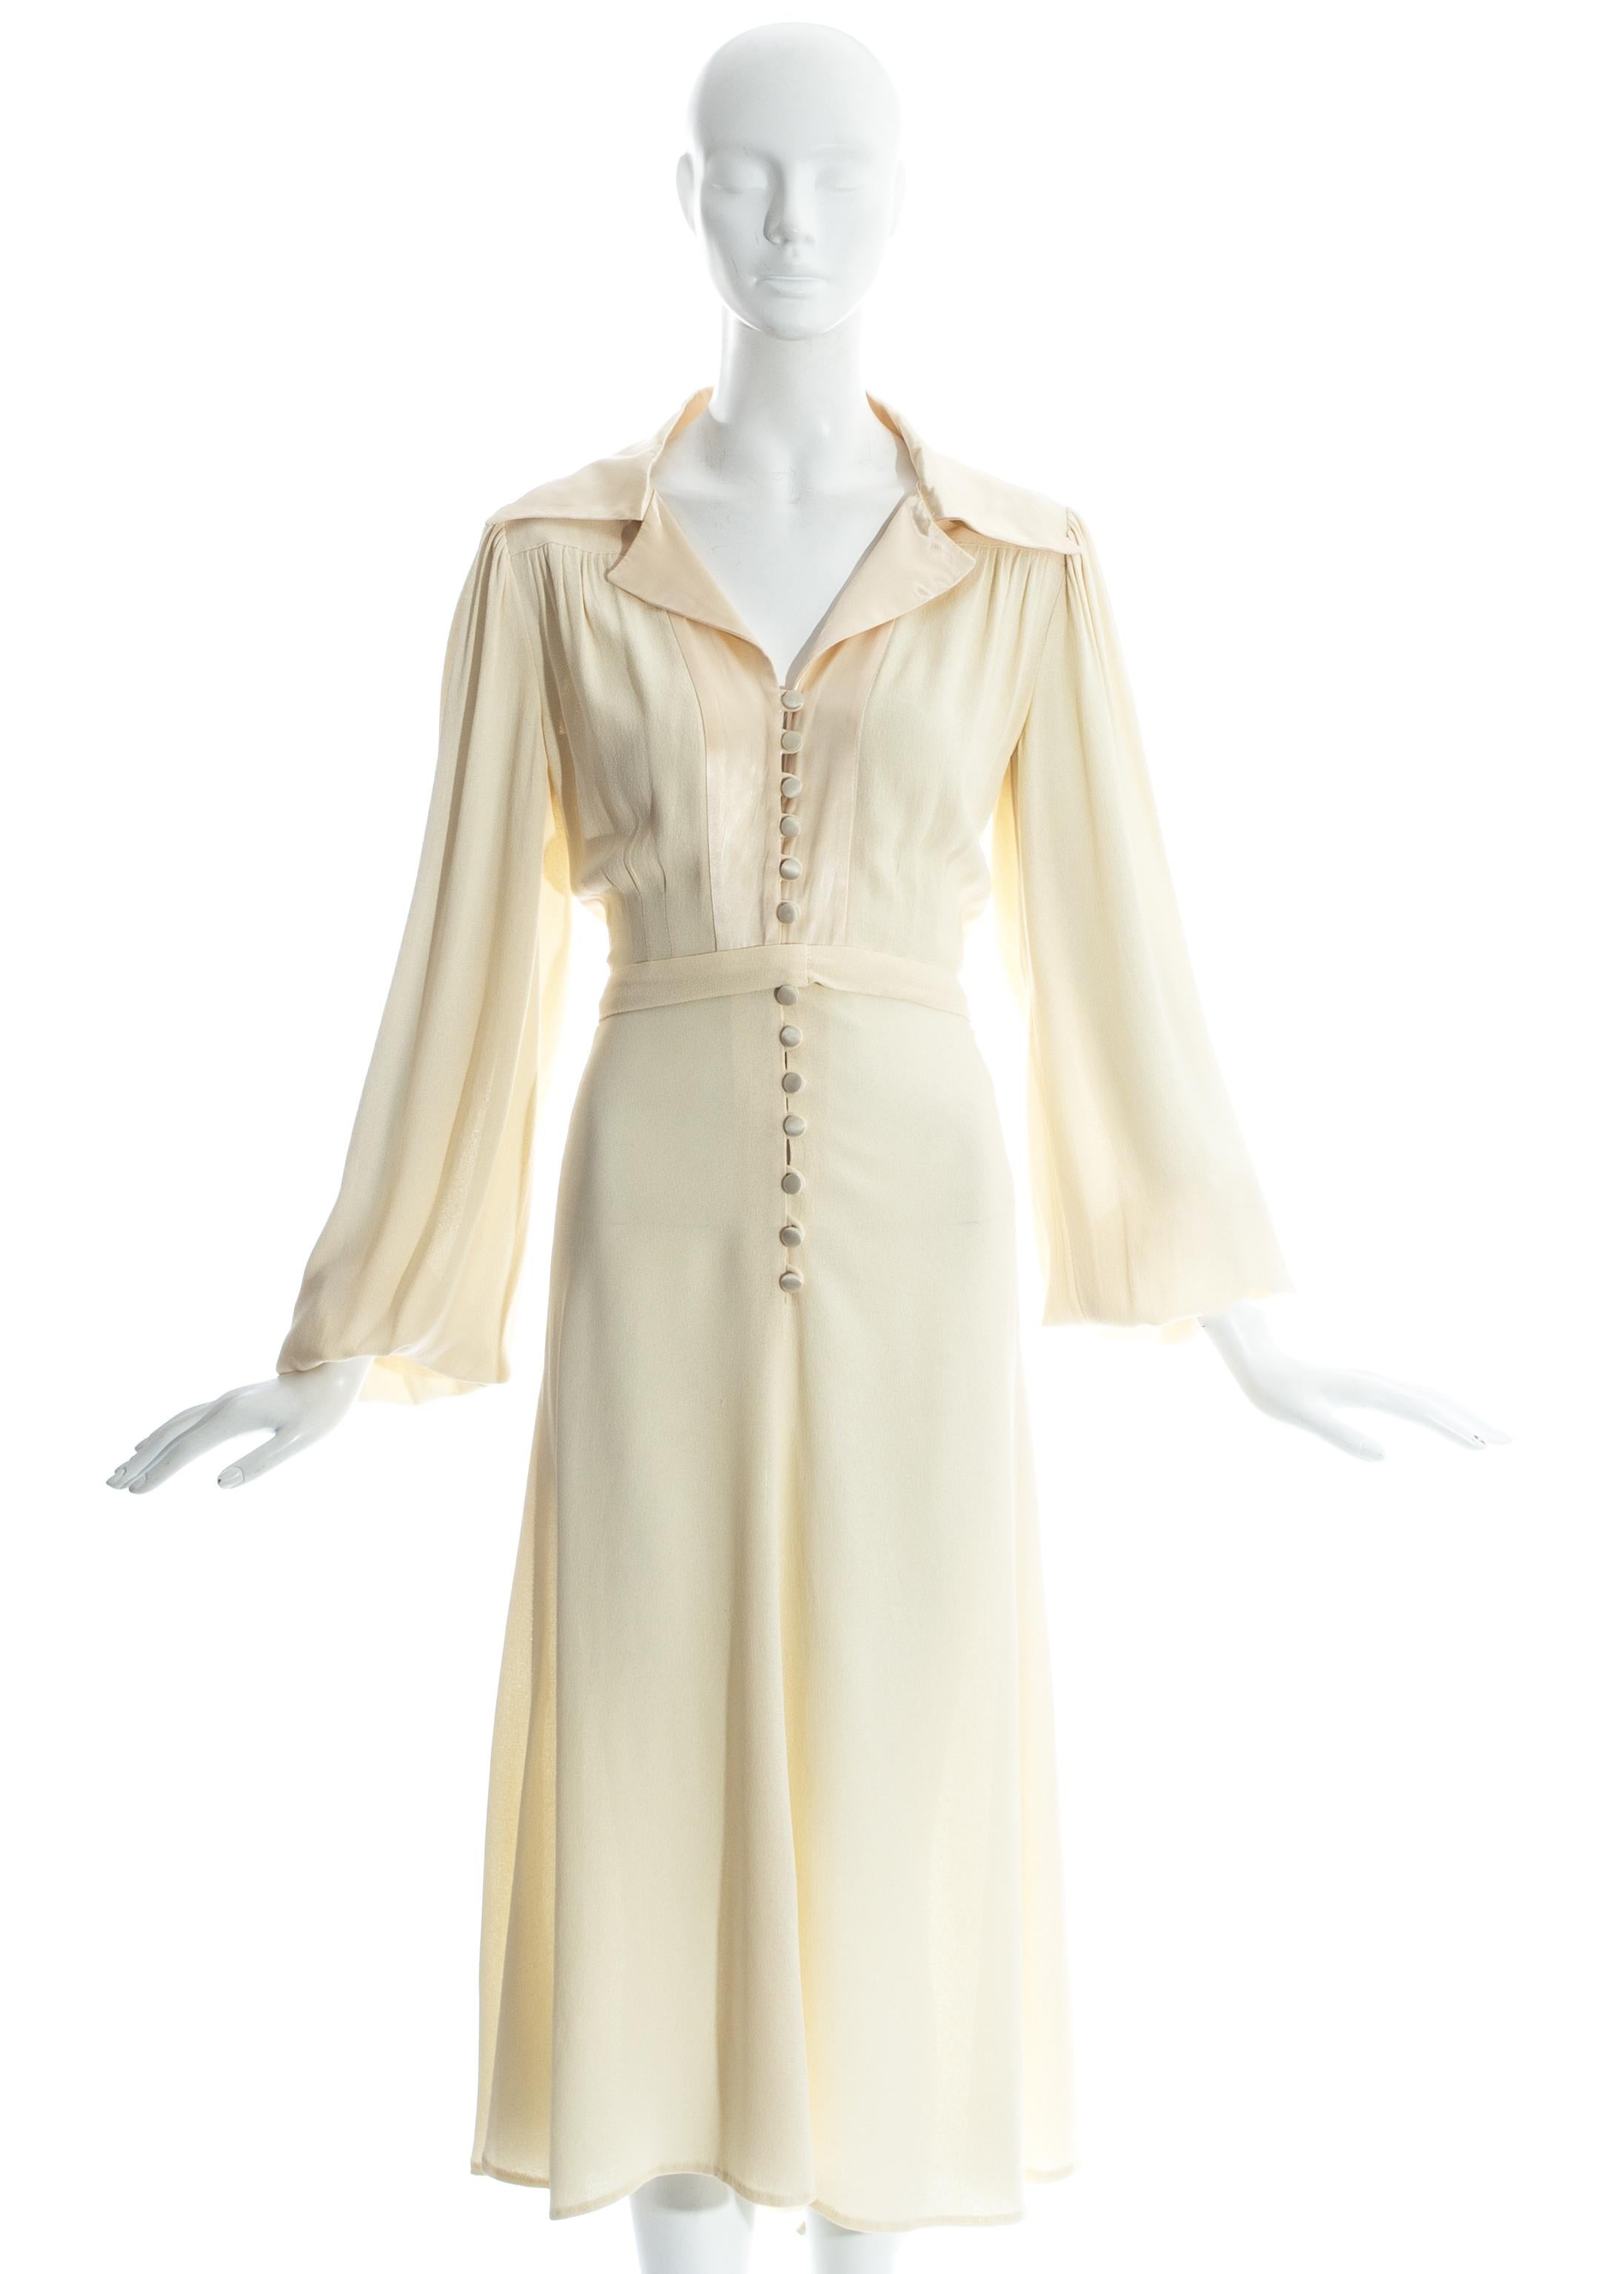 Ossie Clark cream moss crepe dress with satin collar and buttons. 

c. 1970